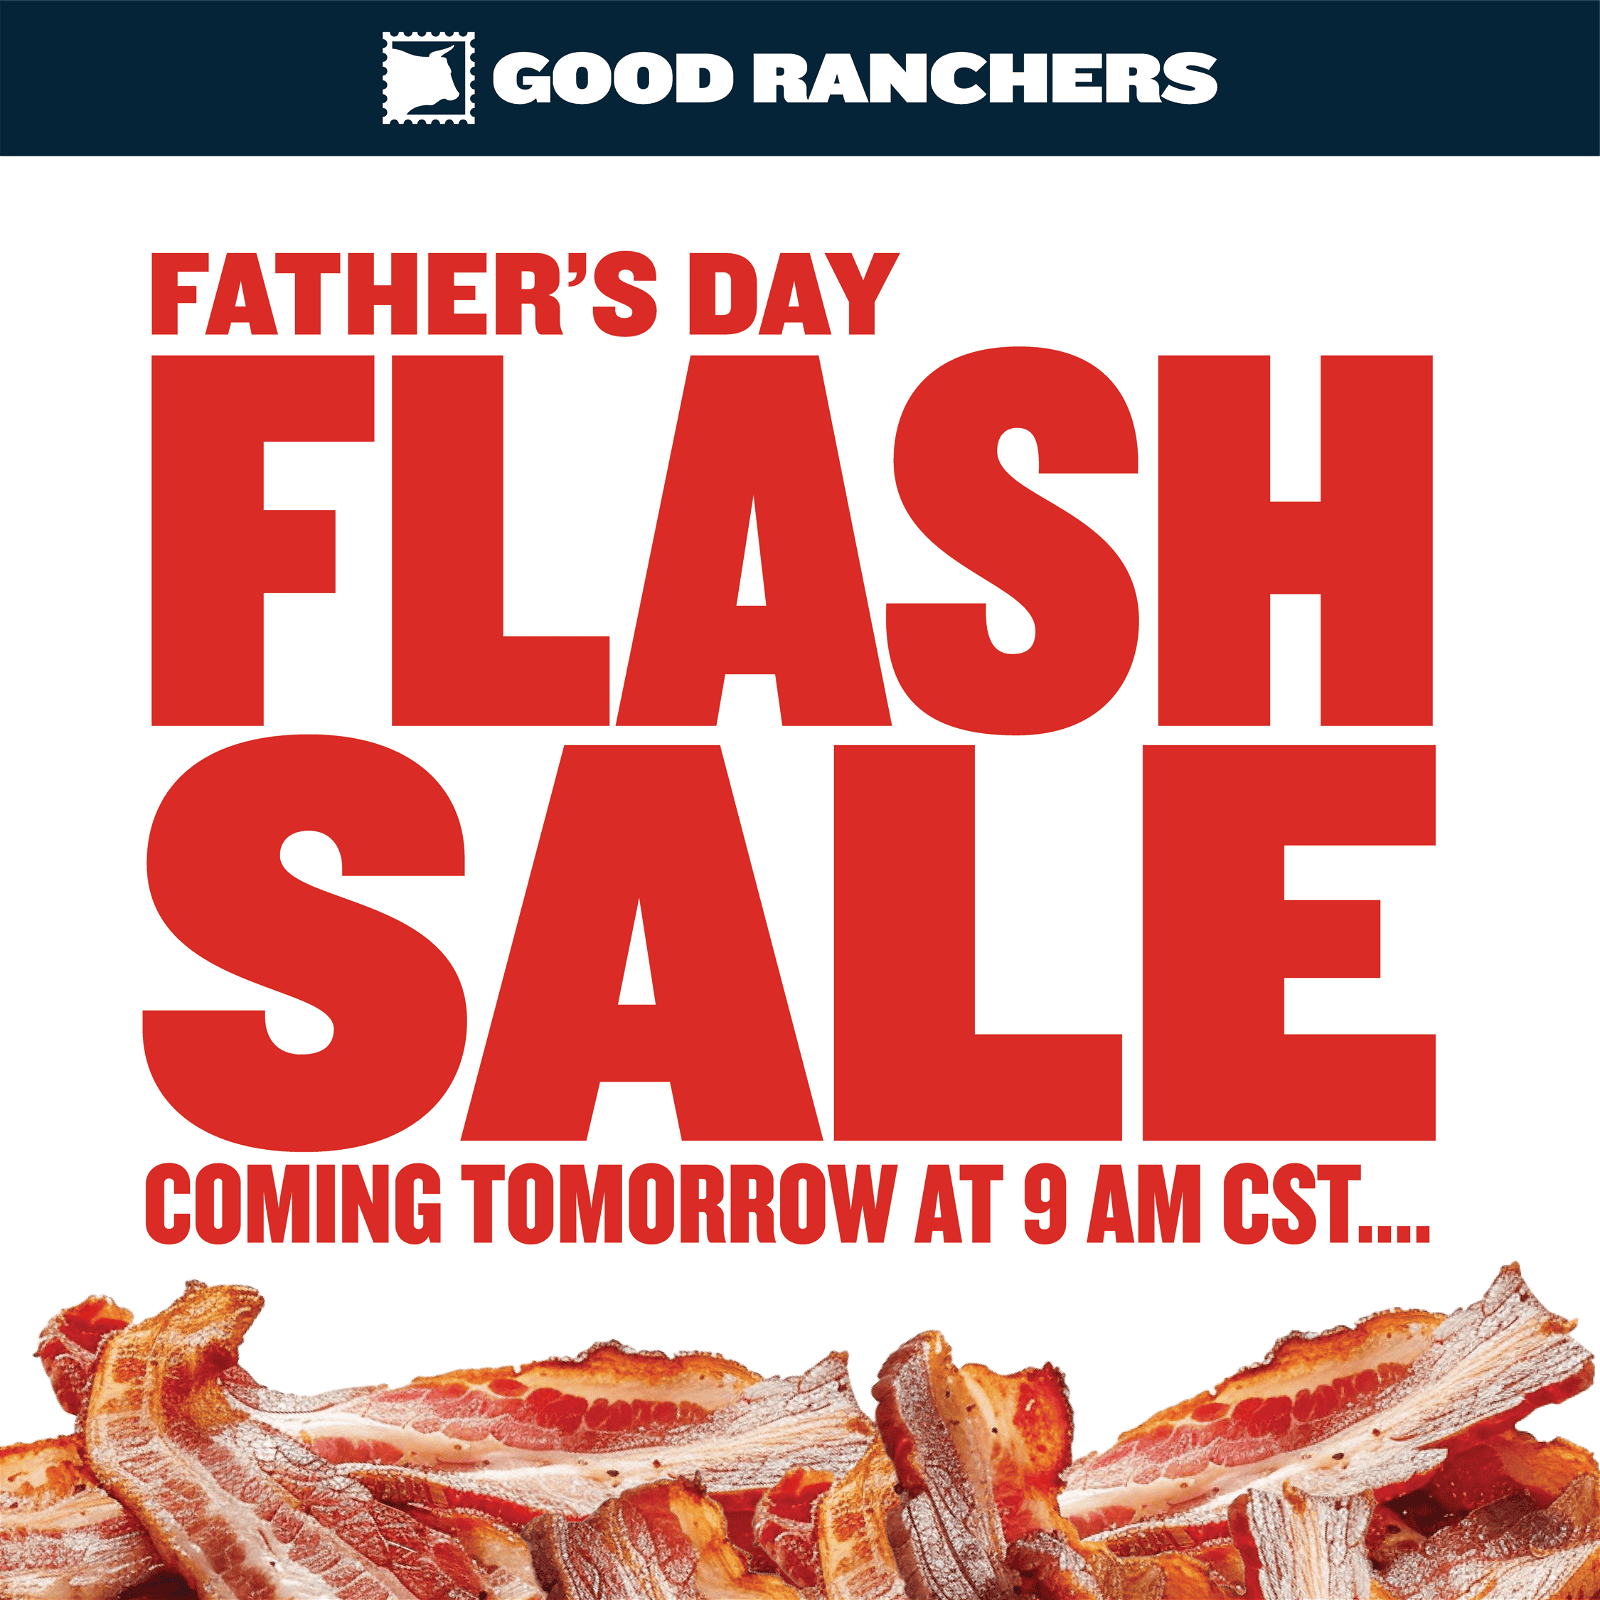 FATHER'S DAY FLASH SALE on 6/12!